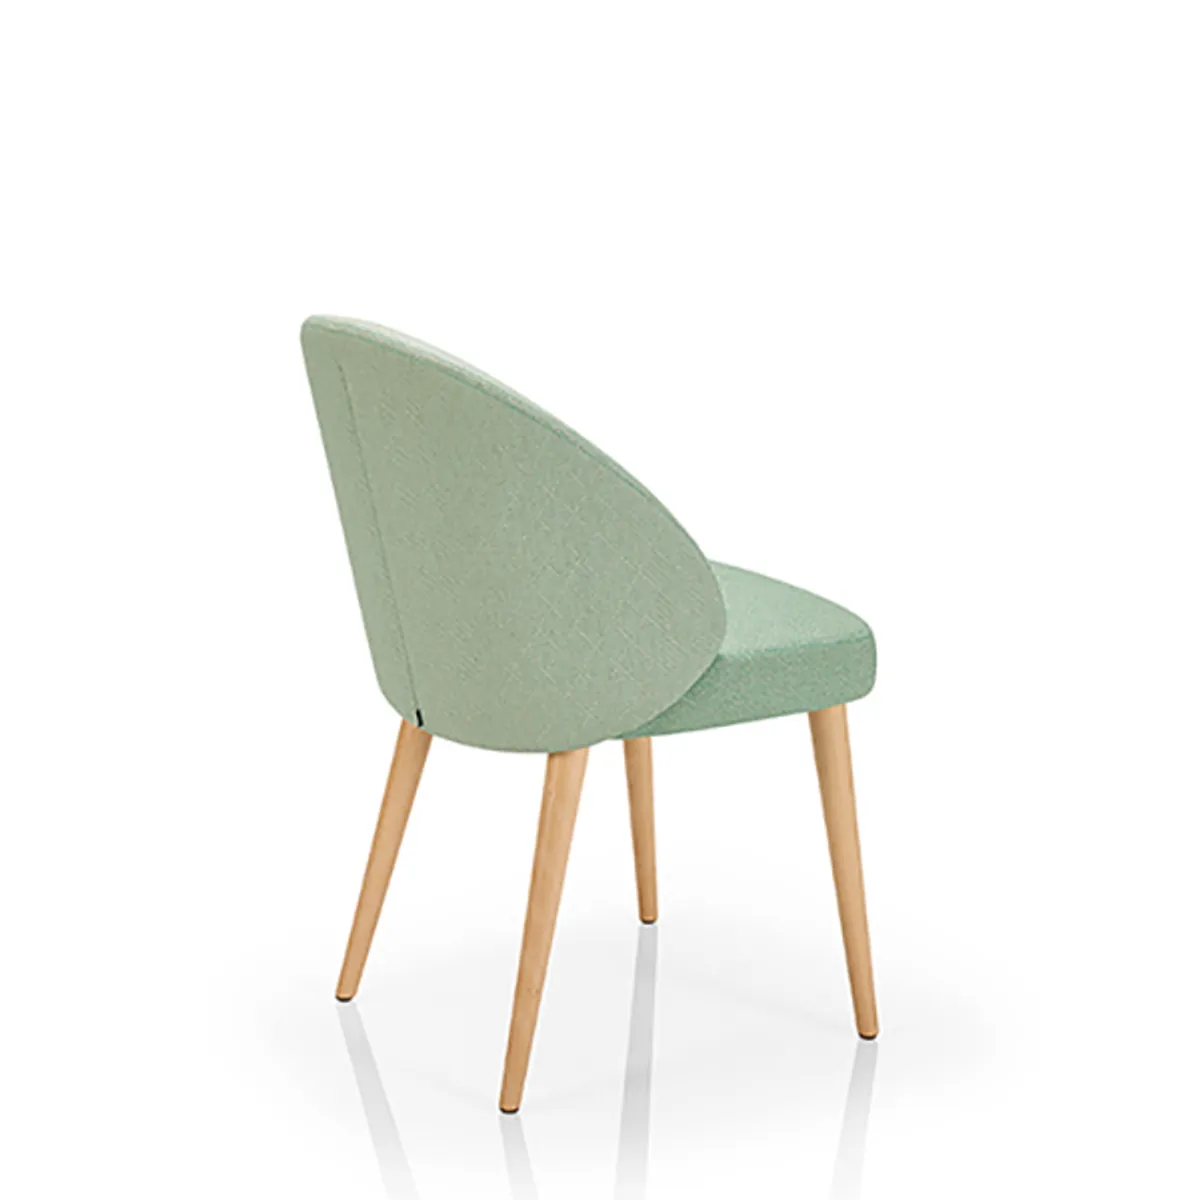 Del Rey Side Chair Hospitality Furniture Suppliers Inside Out Contracts 020